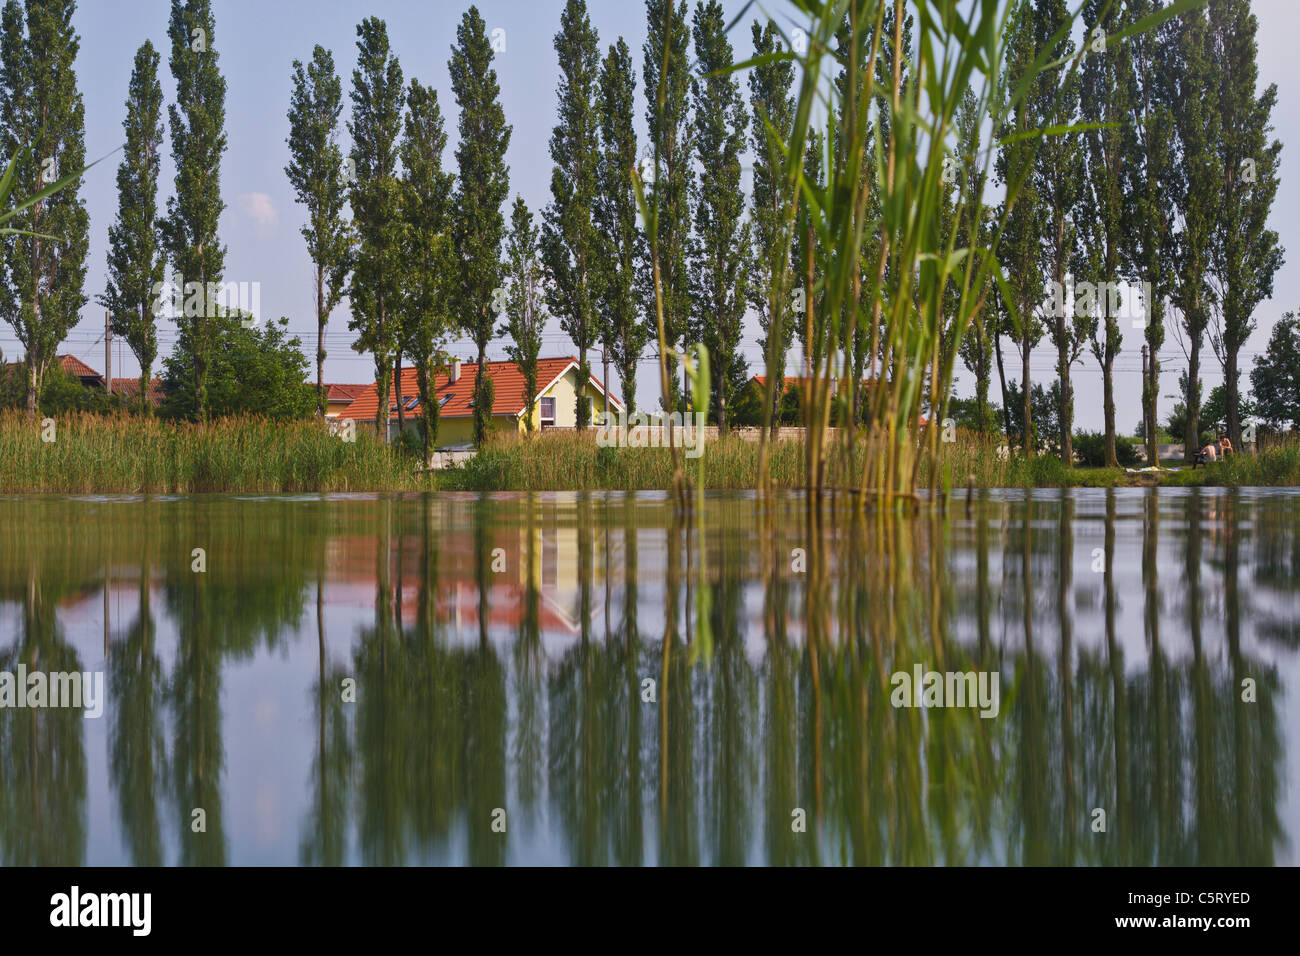 Austria, Guntramsdorf, View of house and tree with reflection in lake Stock Photo